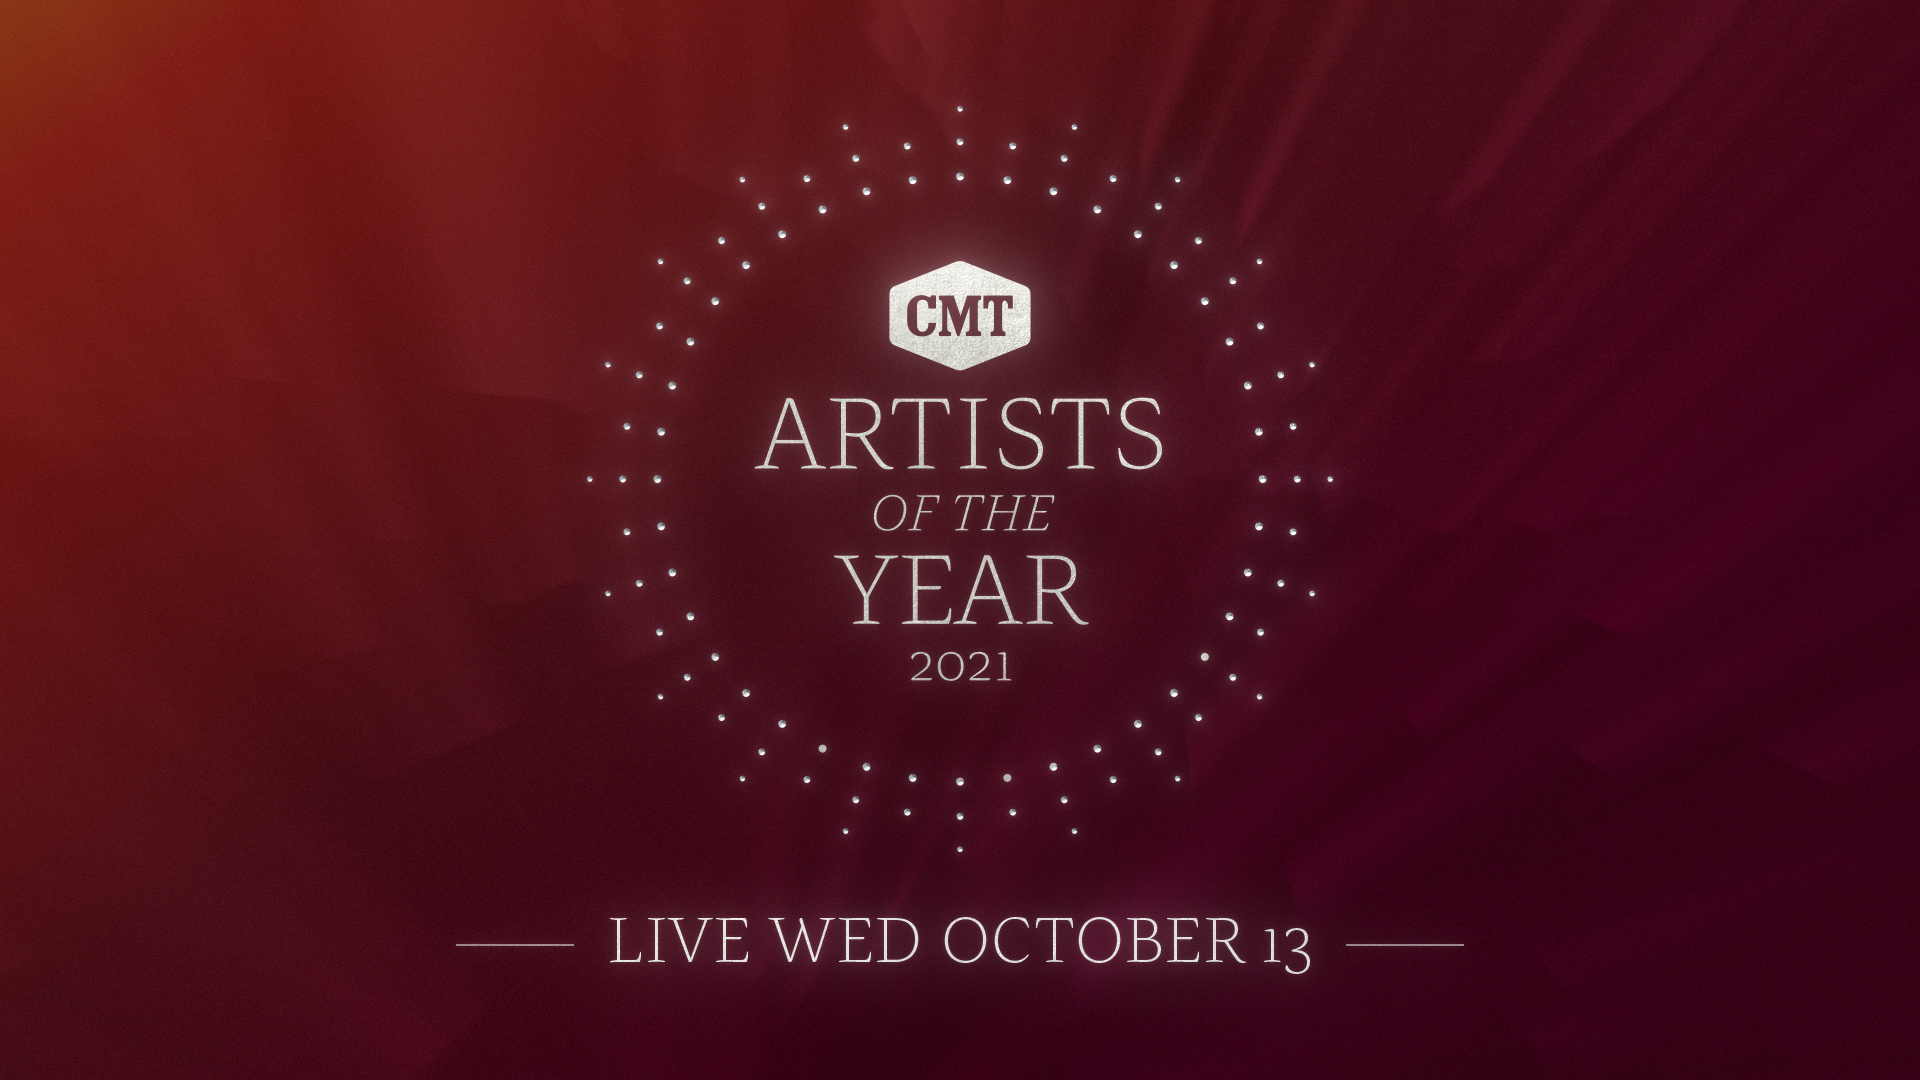 What You Need to Know About the 2021 CMT Artists Of The Year Ceremony